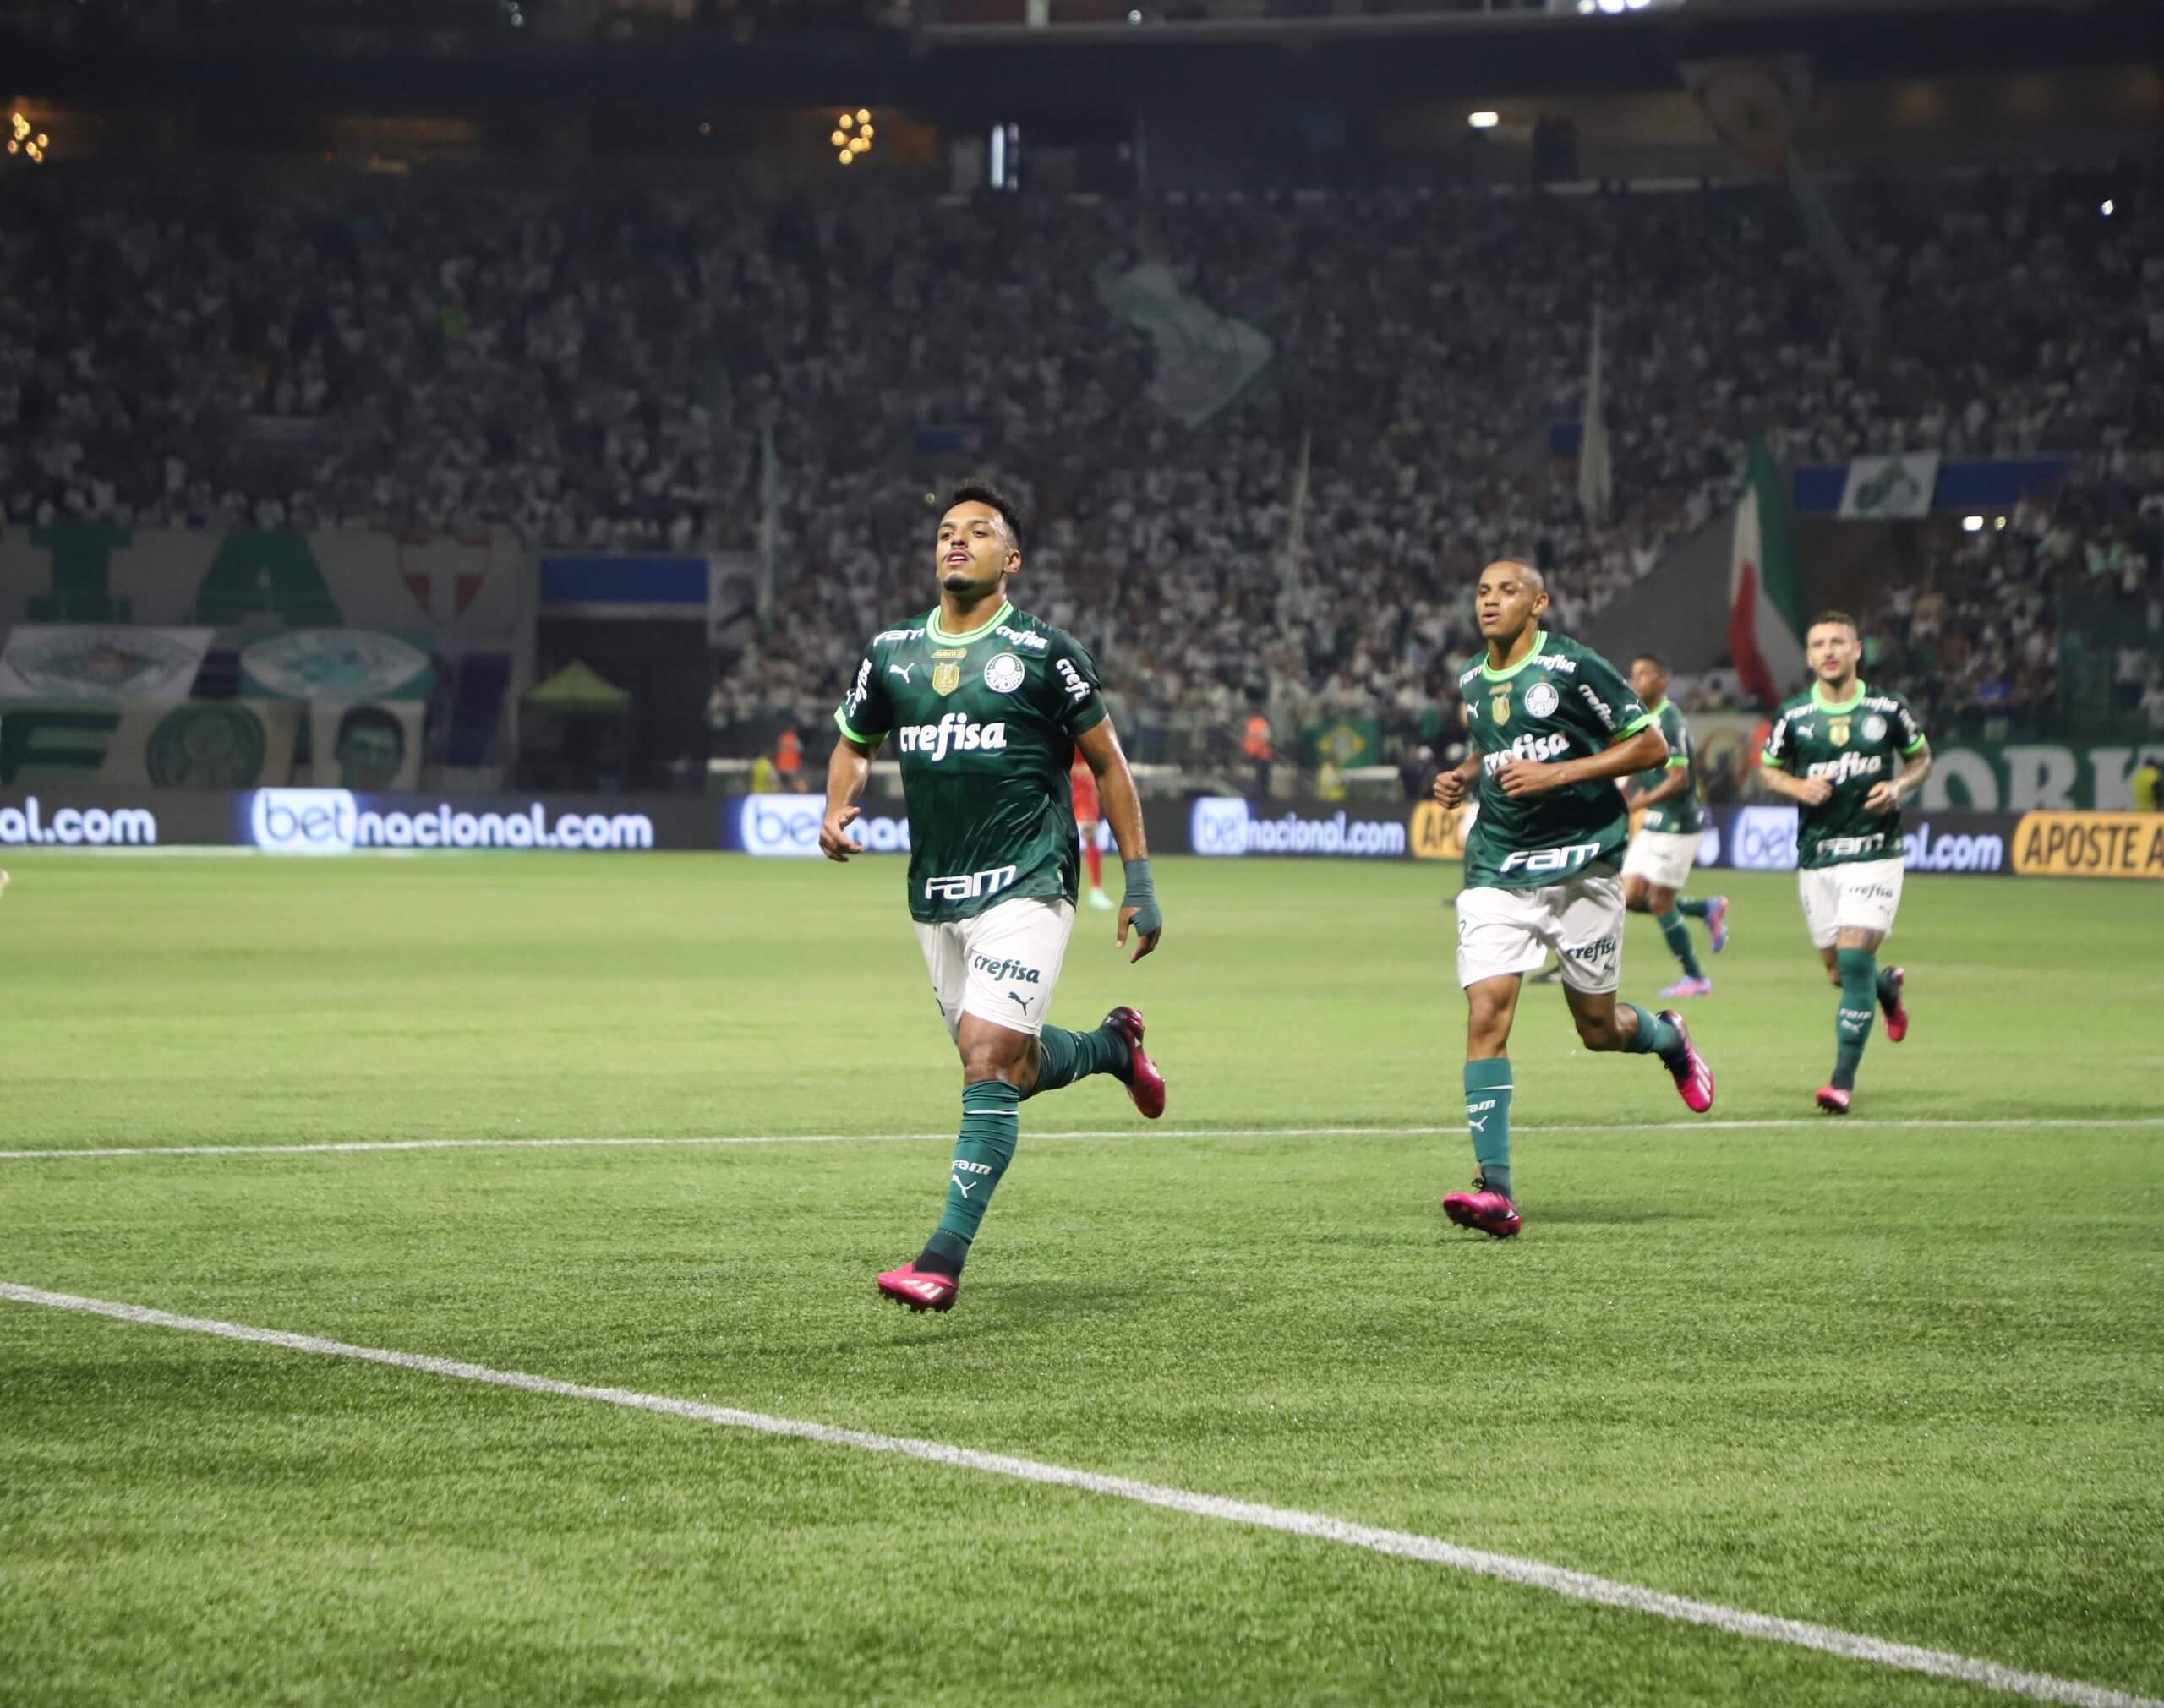 RECORD DATE NOT STATED Brazil Cup: Palmeiras vs Tombense. (SPO) Brazil Cup: Palmeiras vs Tombense. April 12, 2023, Sao Paulo, Brazil: Soccer match between Palmeiras and Tombense, for the first leg of the third phase of the Copa do Brasil, Brazil Cup, at Allianz Park, in Sao Paulo. Palmeiras won 4-3. Goals were scored by G. Menino 37 , J. M, Lopez 41 , G. Gomez 88 (P), R. Navarro 90+7 for Palmeiras while M. Frizzo 10 and Marcelinho 90 scored for Tombense. Credit: Leco Viana/Thenews2 PUBLICATIONxNOTxINxUSA Copyright: xLecoxVianax